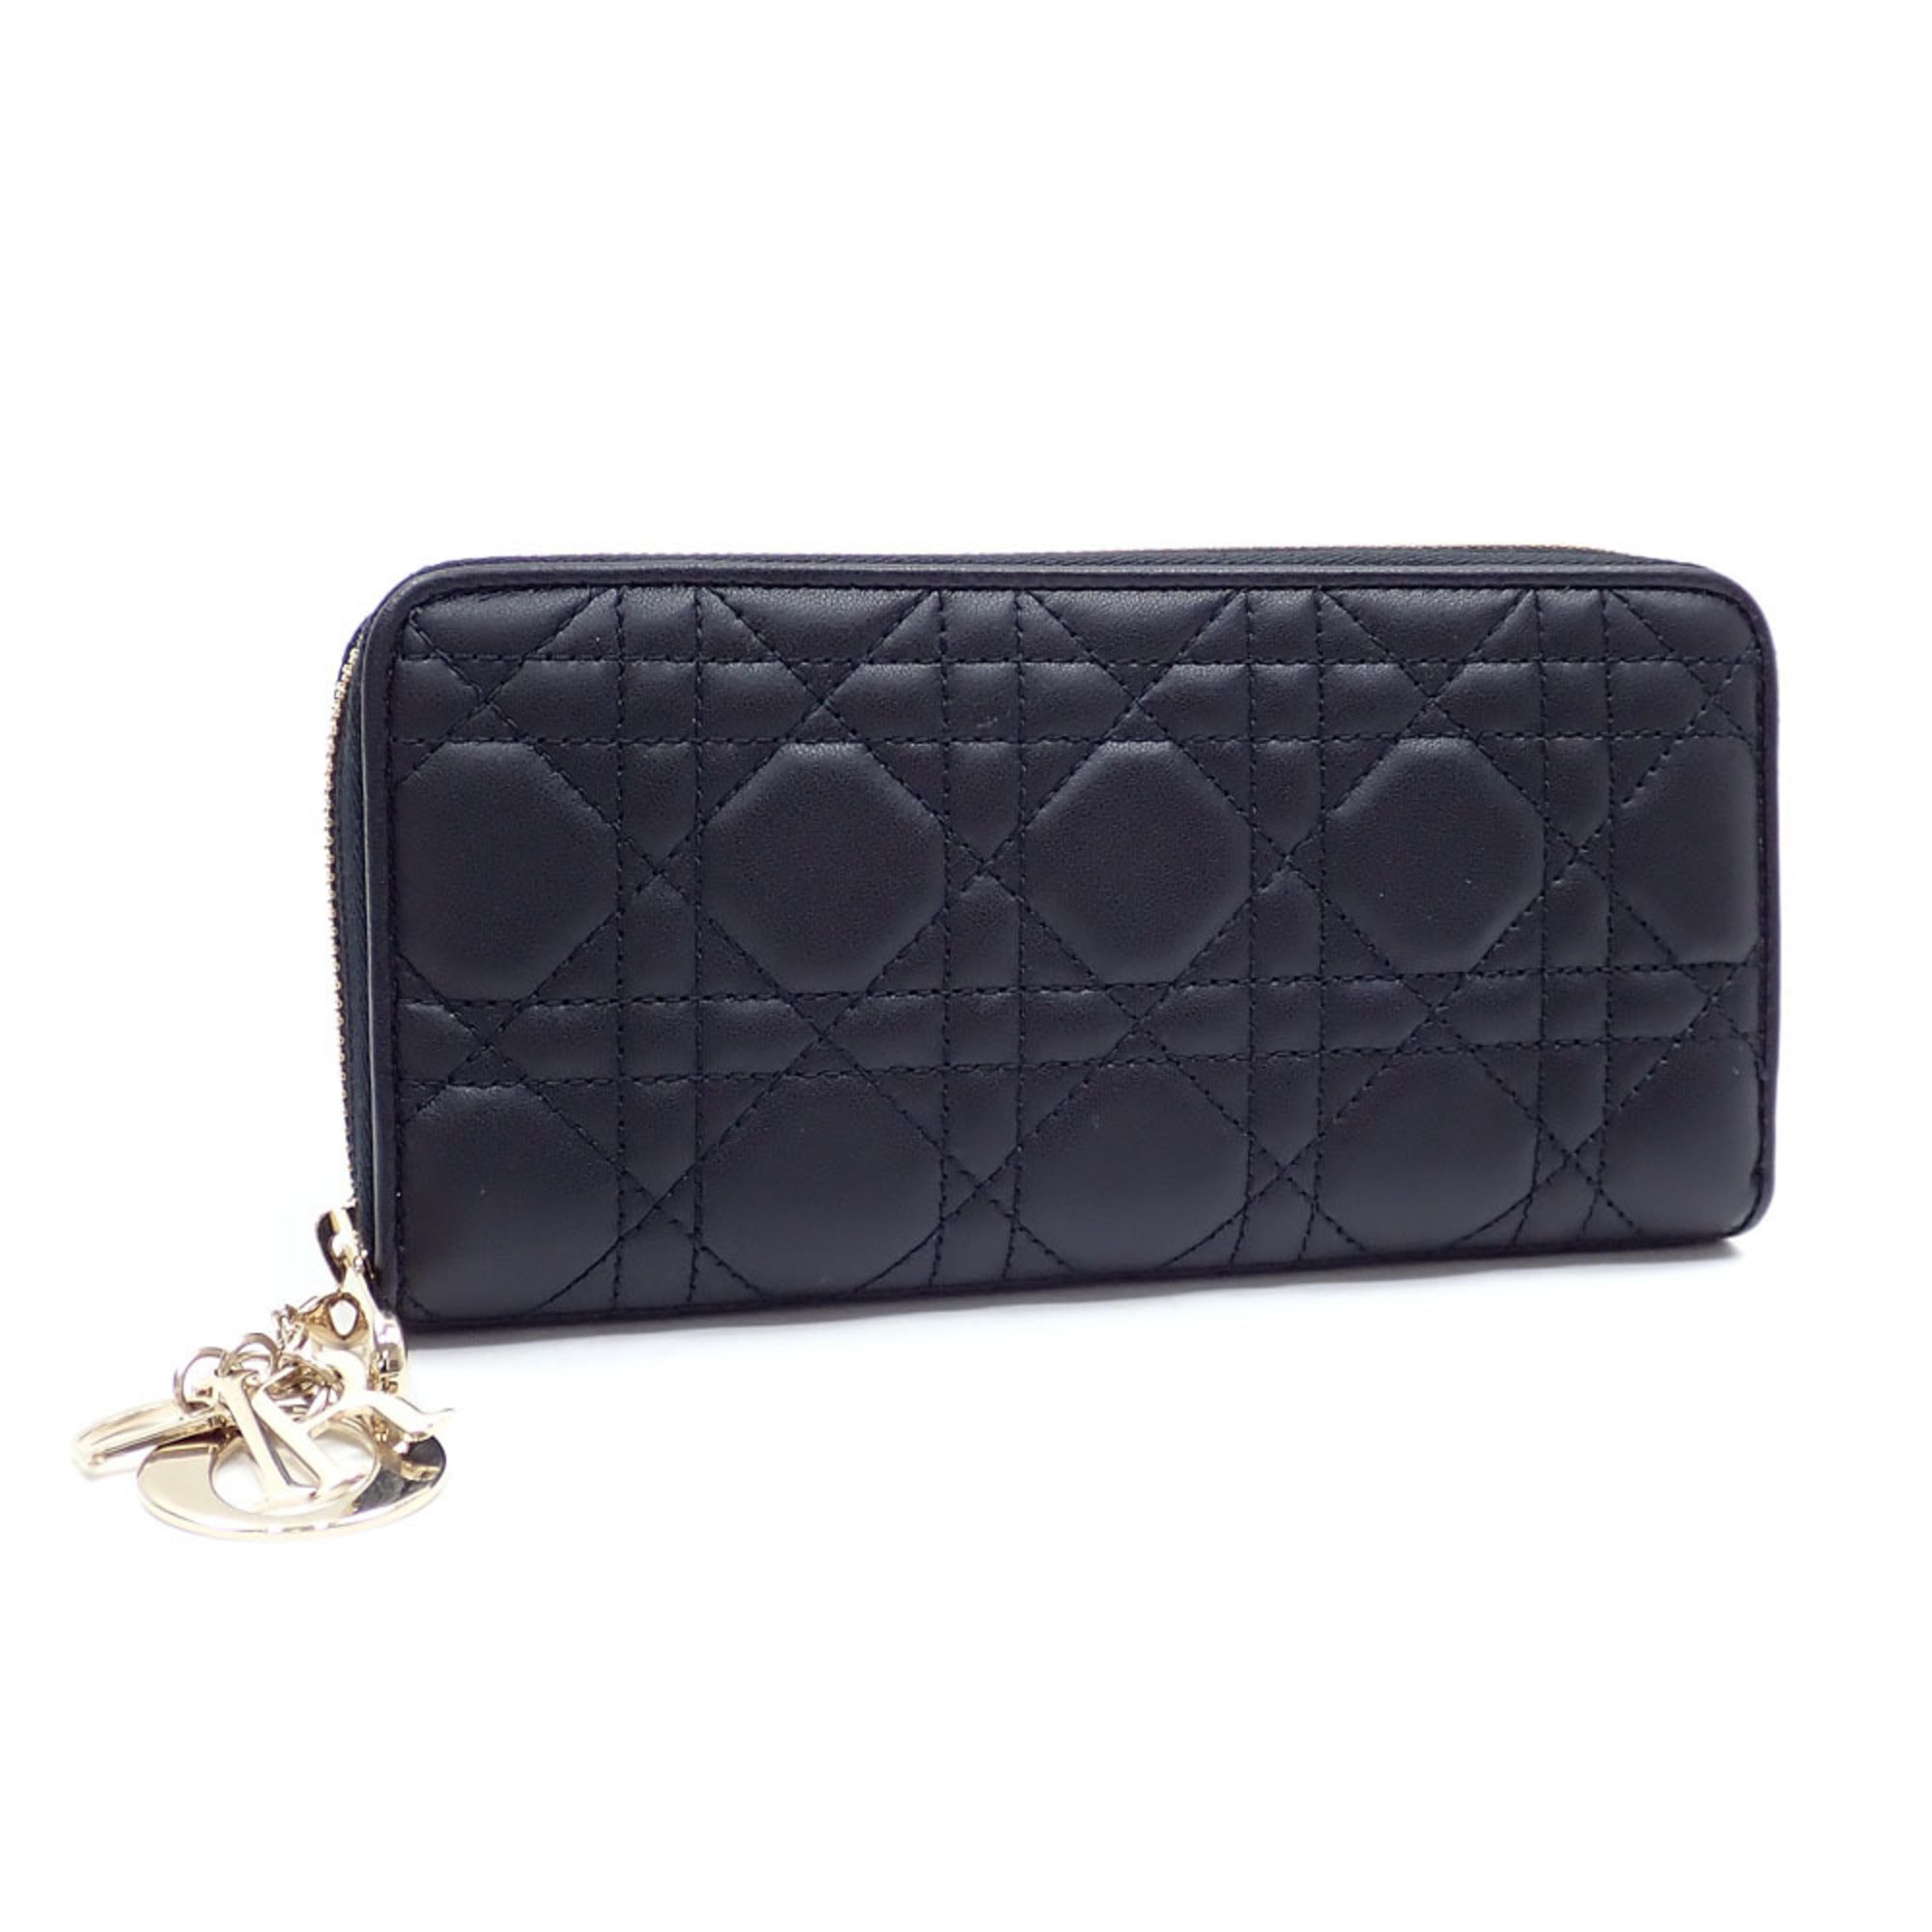 Round Long Wallet Lady Voyageur Women's Black Lambskin S0007ONMJ_M900 Cannage Leather A6047120